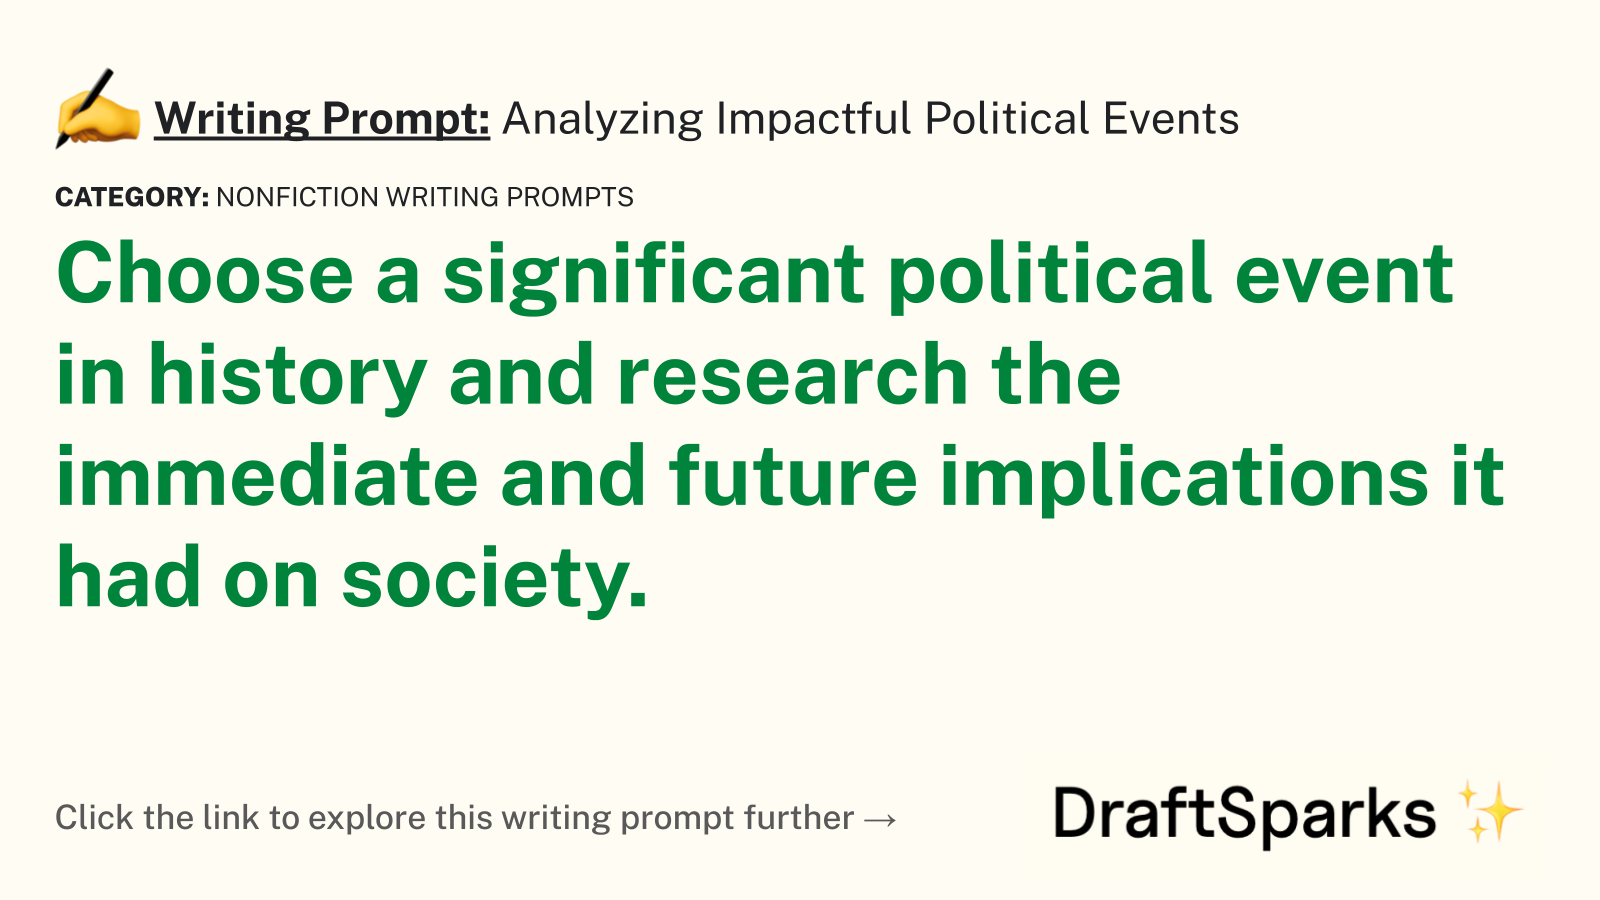 Analyzing Impactful Political Events